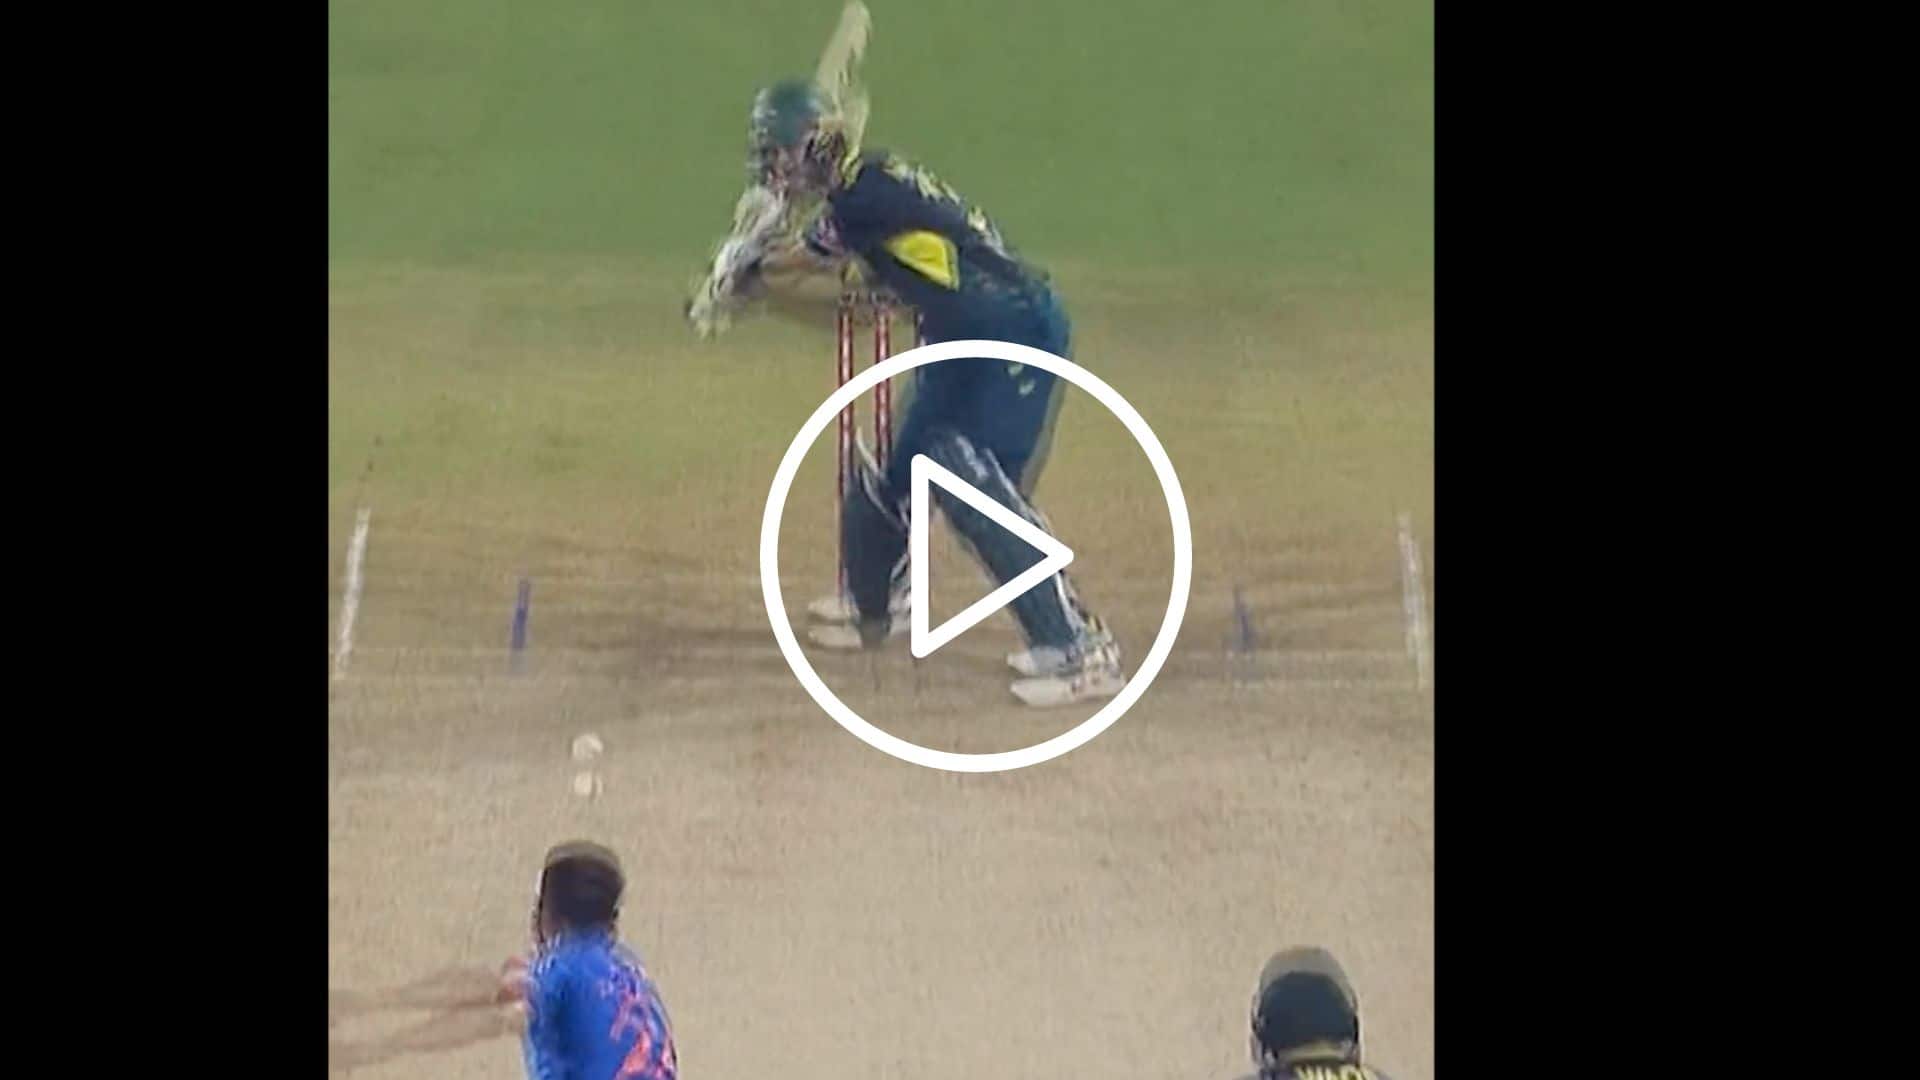 [Watch] 6,4,4,4 - Glenn Maxwell Hammers Prasidh Krishna In the Final Over To Seal AUS Win